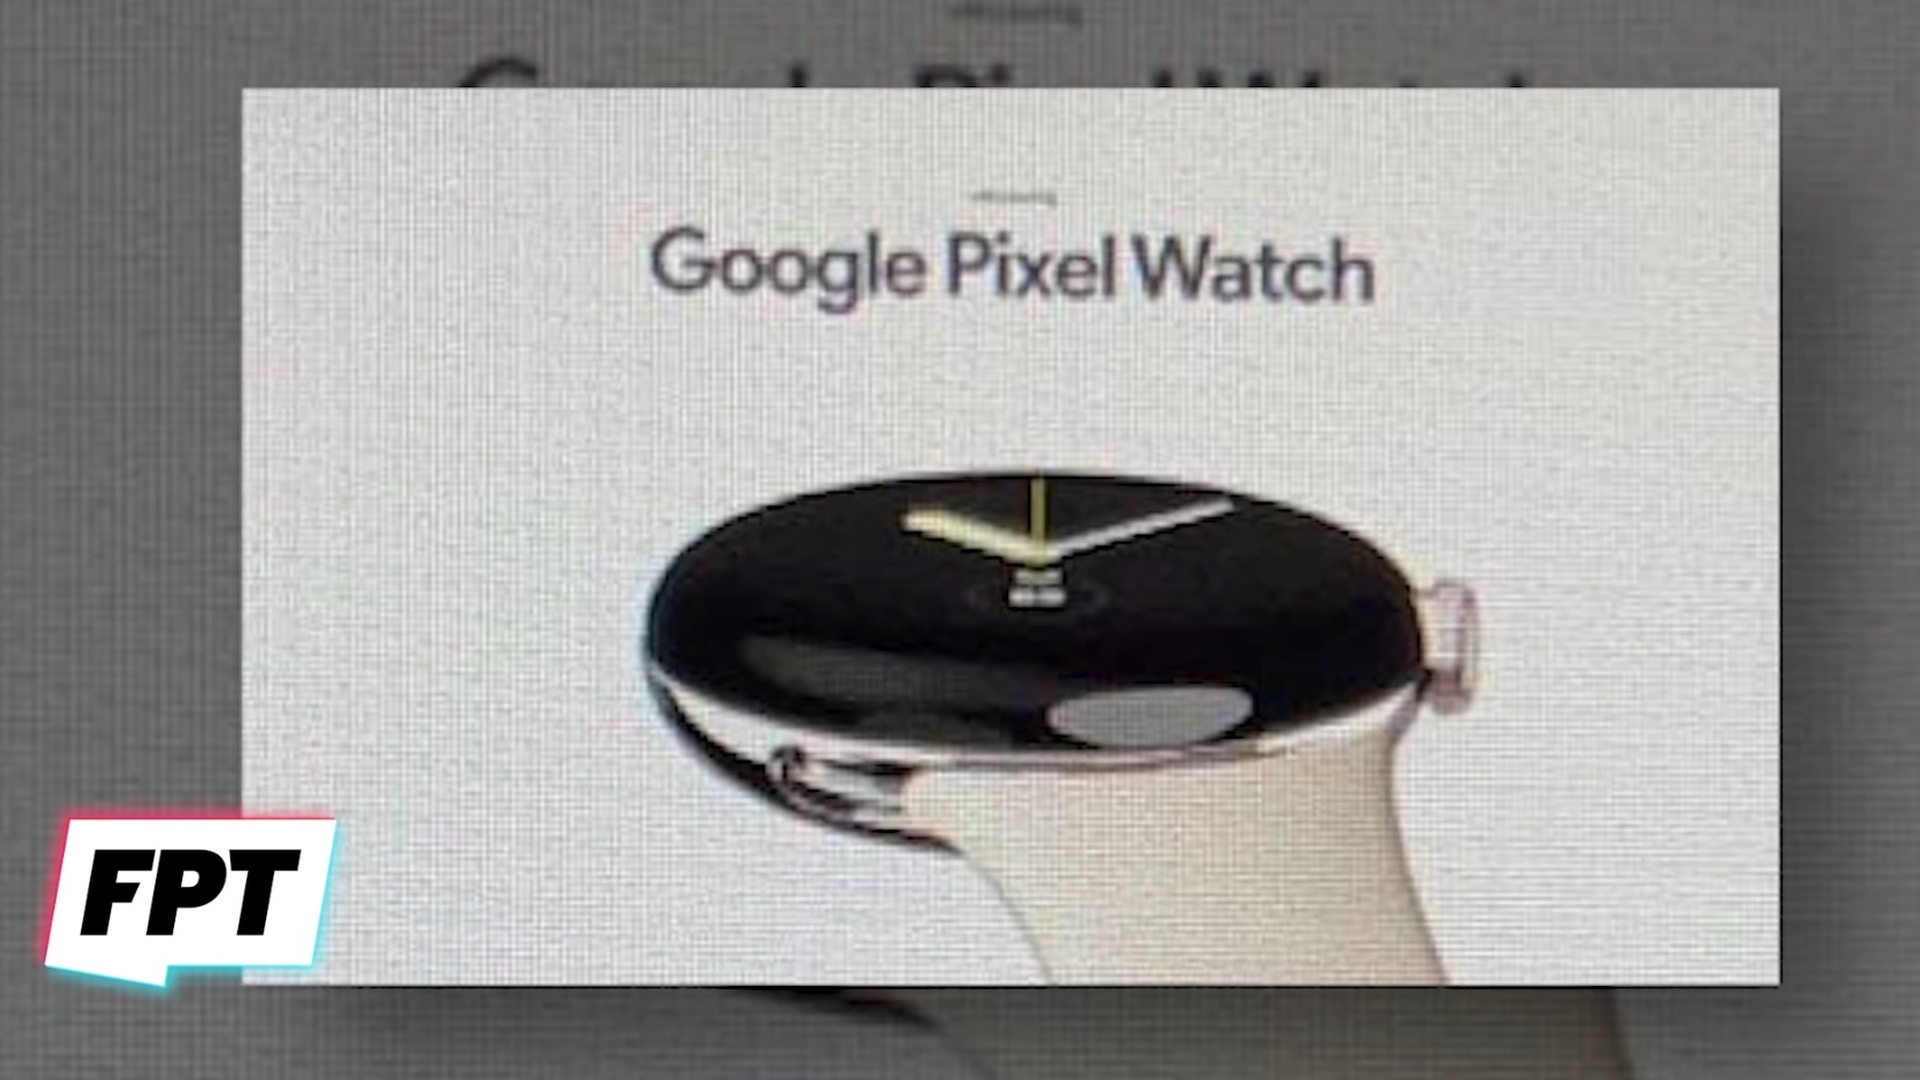 Google Pixel Watch Prosser marketing image showing watch face and strap 